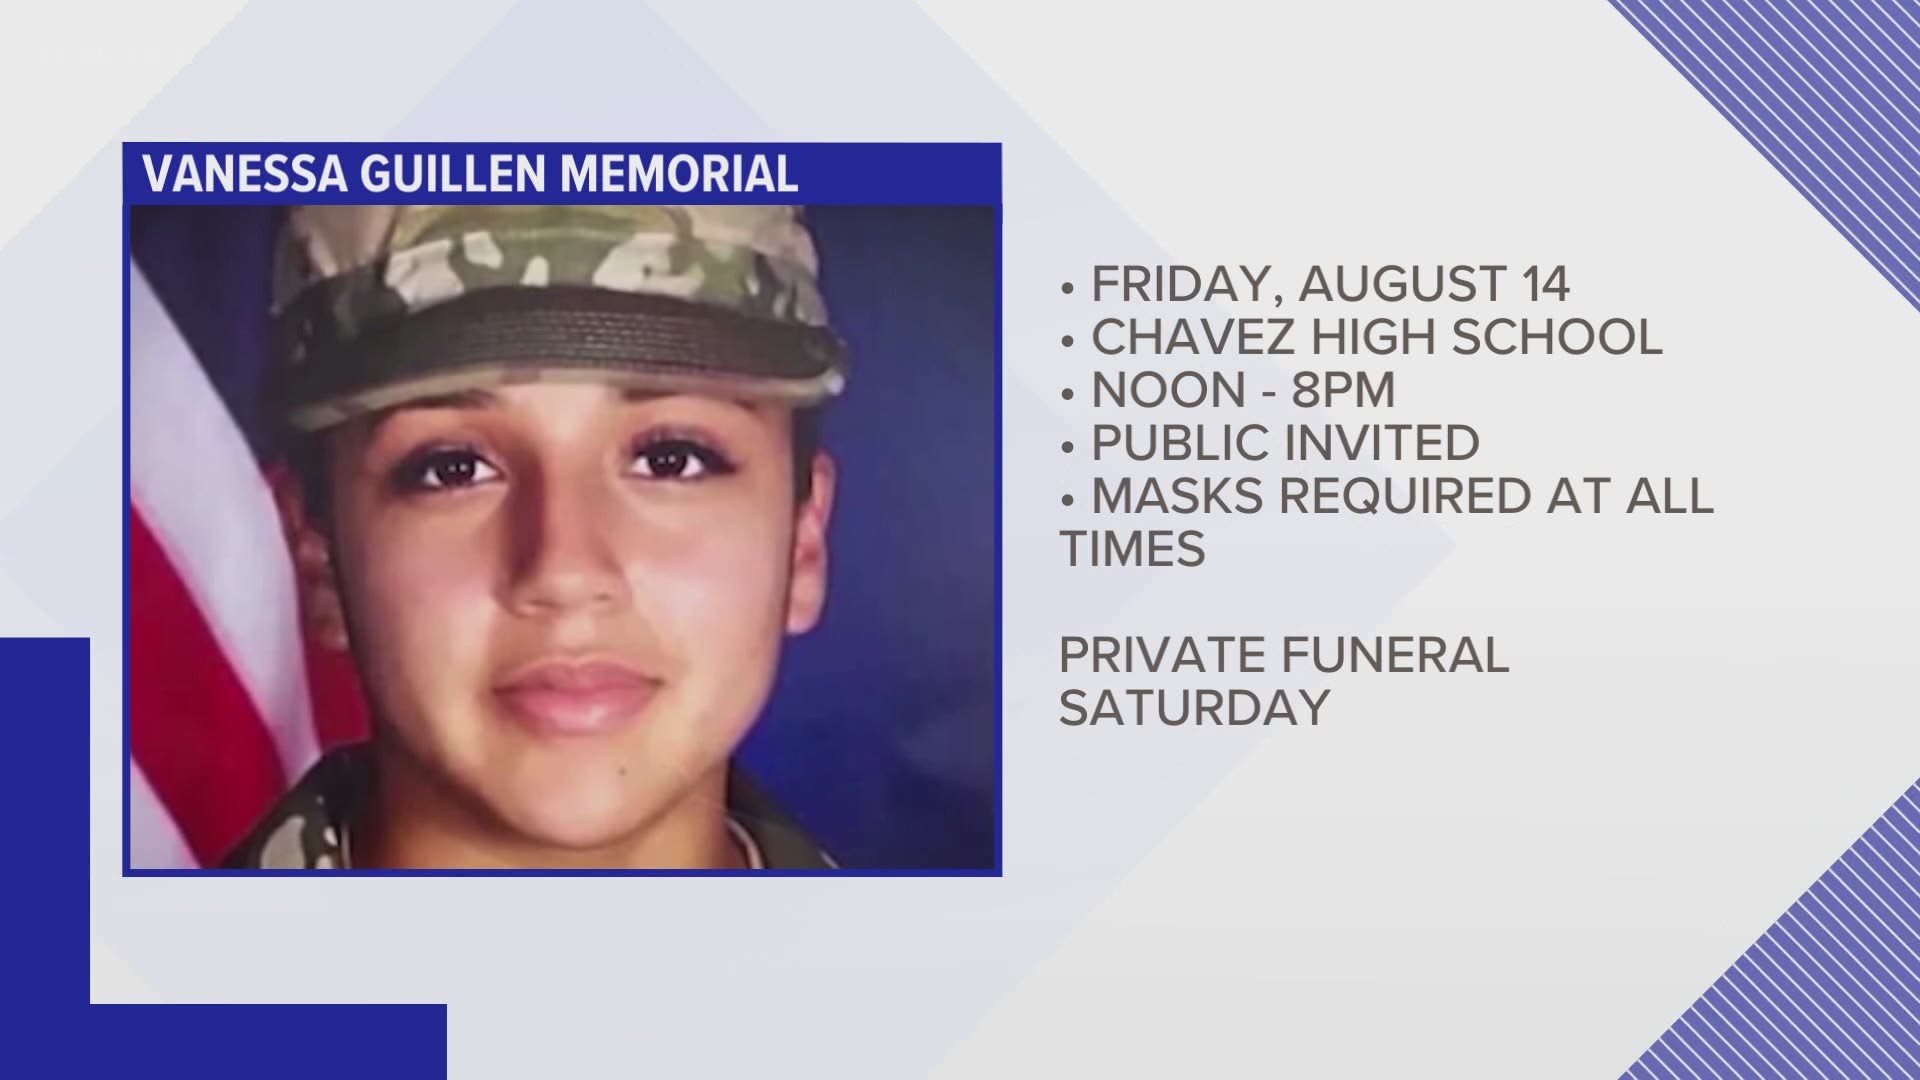 Vanessa Guillen's public memorial will be held in Houston at Chavez High School on Aug. 14 from noon until 8 p.m.